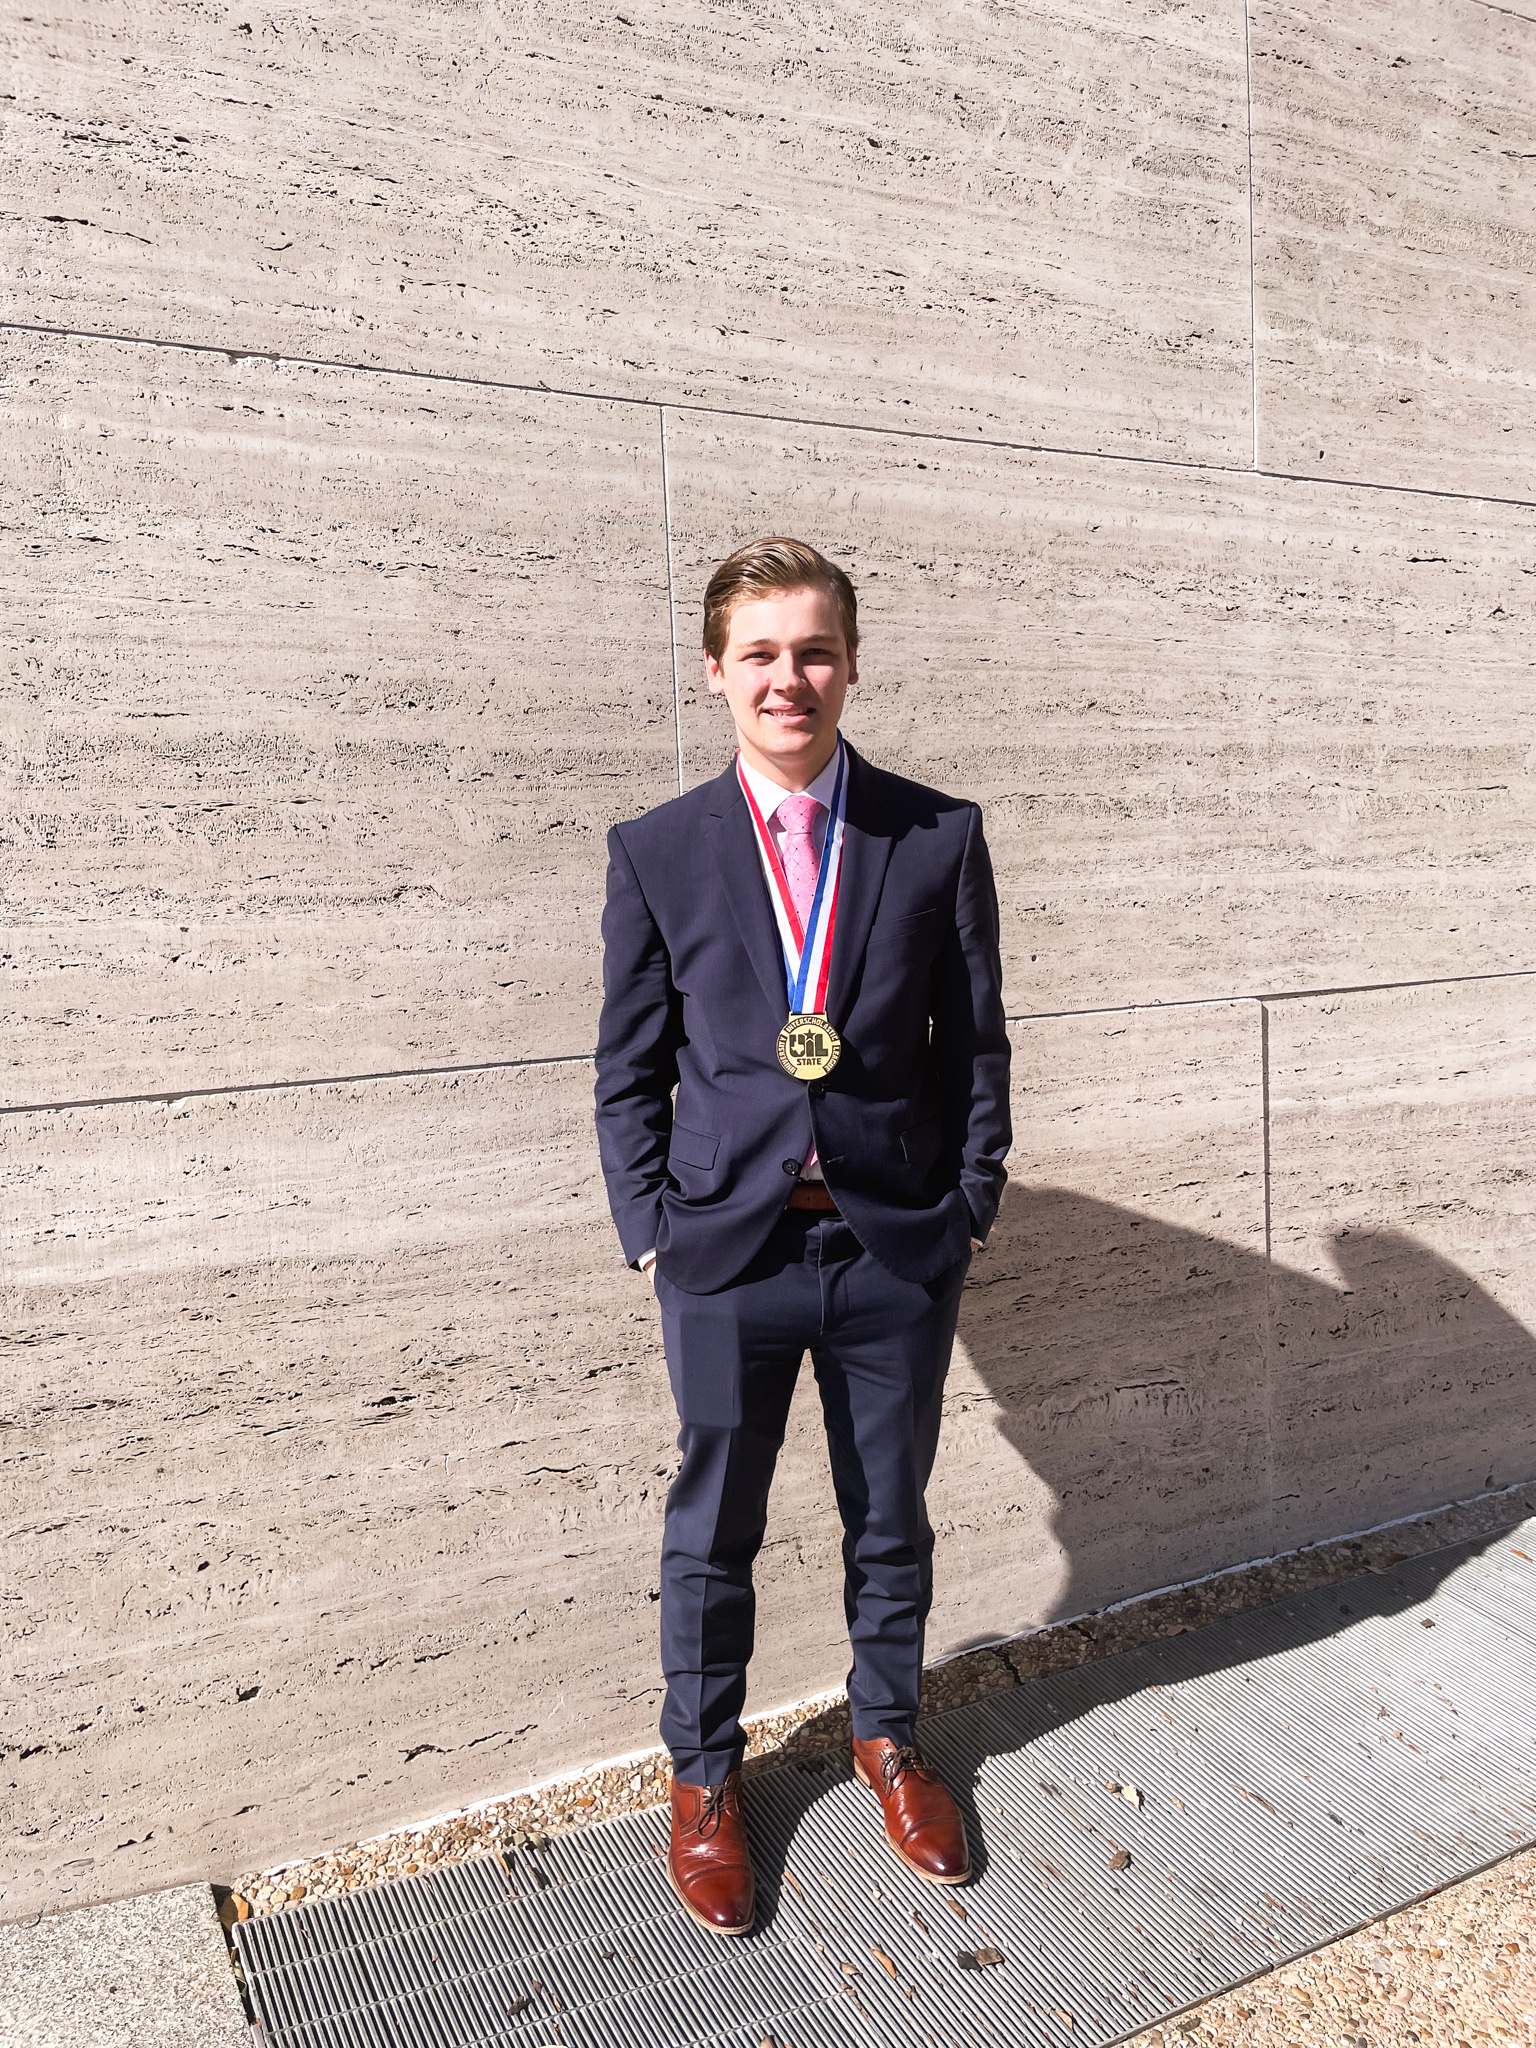 South student earns UIL Academic State Championship